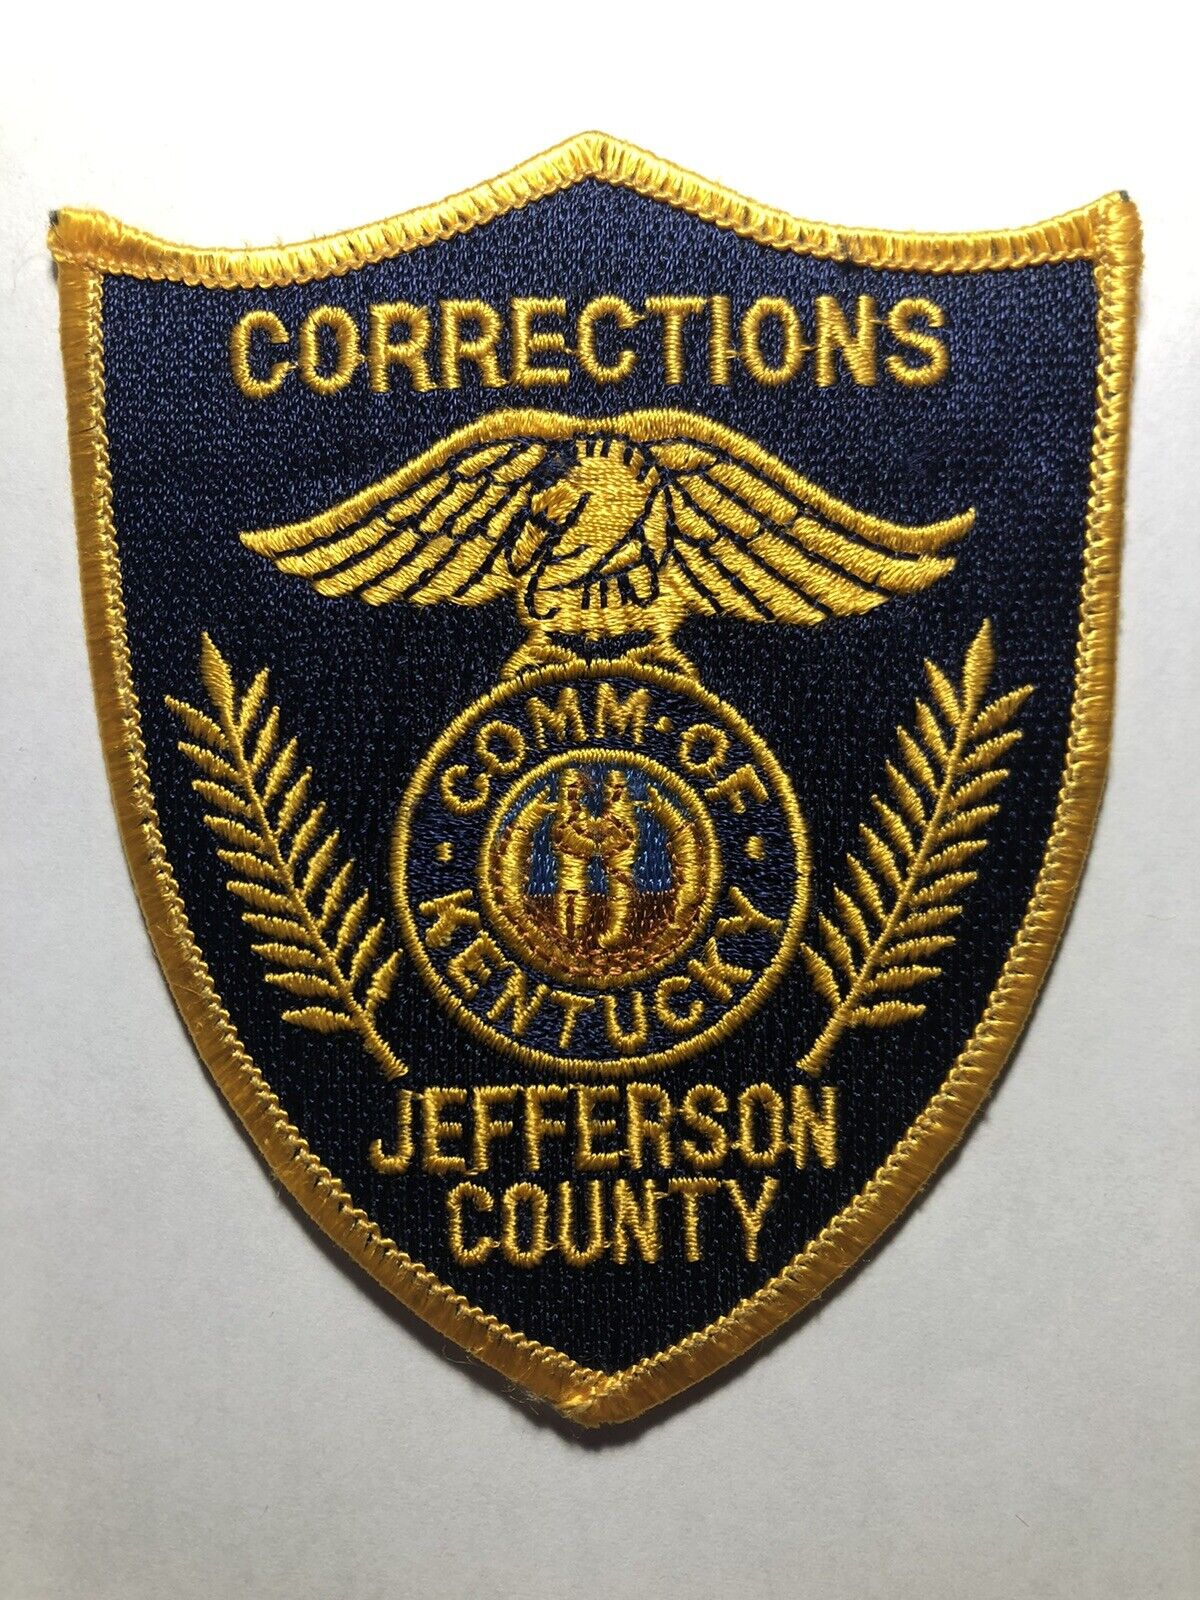 Vintage Jefferson County Kentucky Corrections Patch